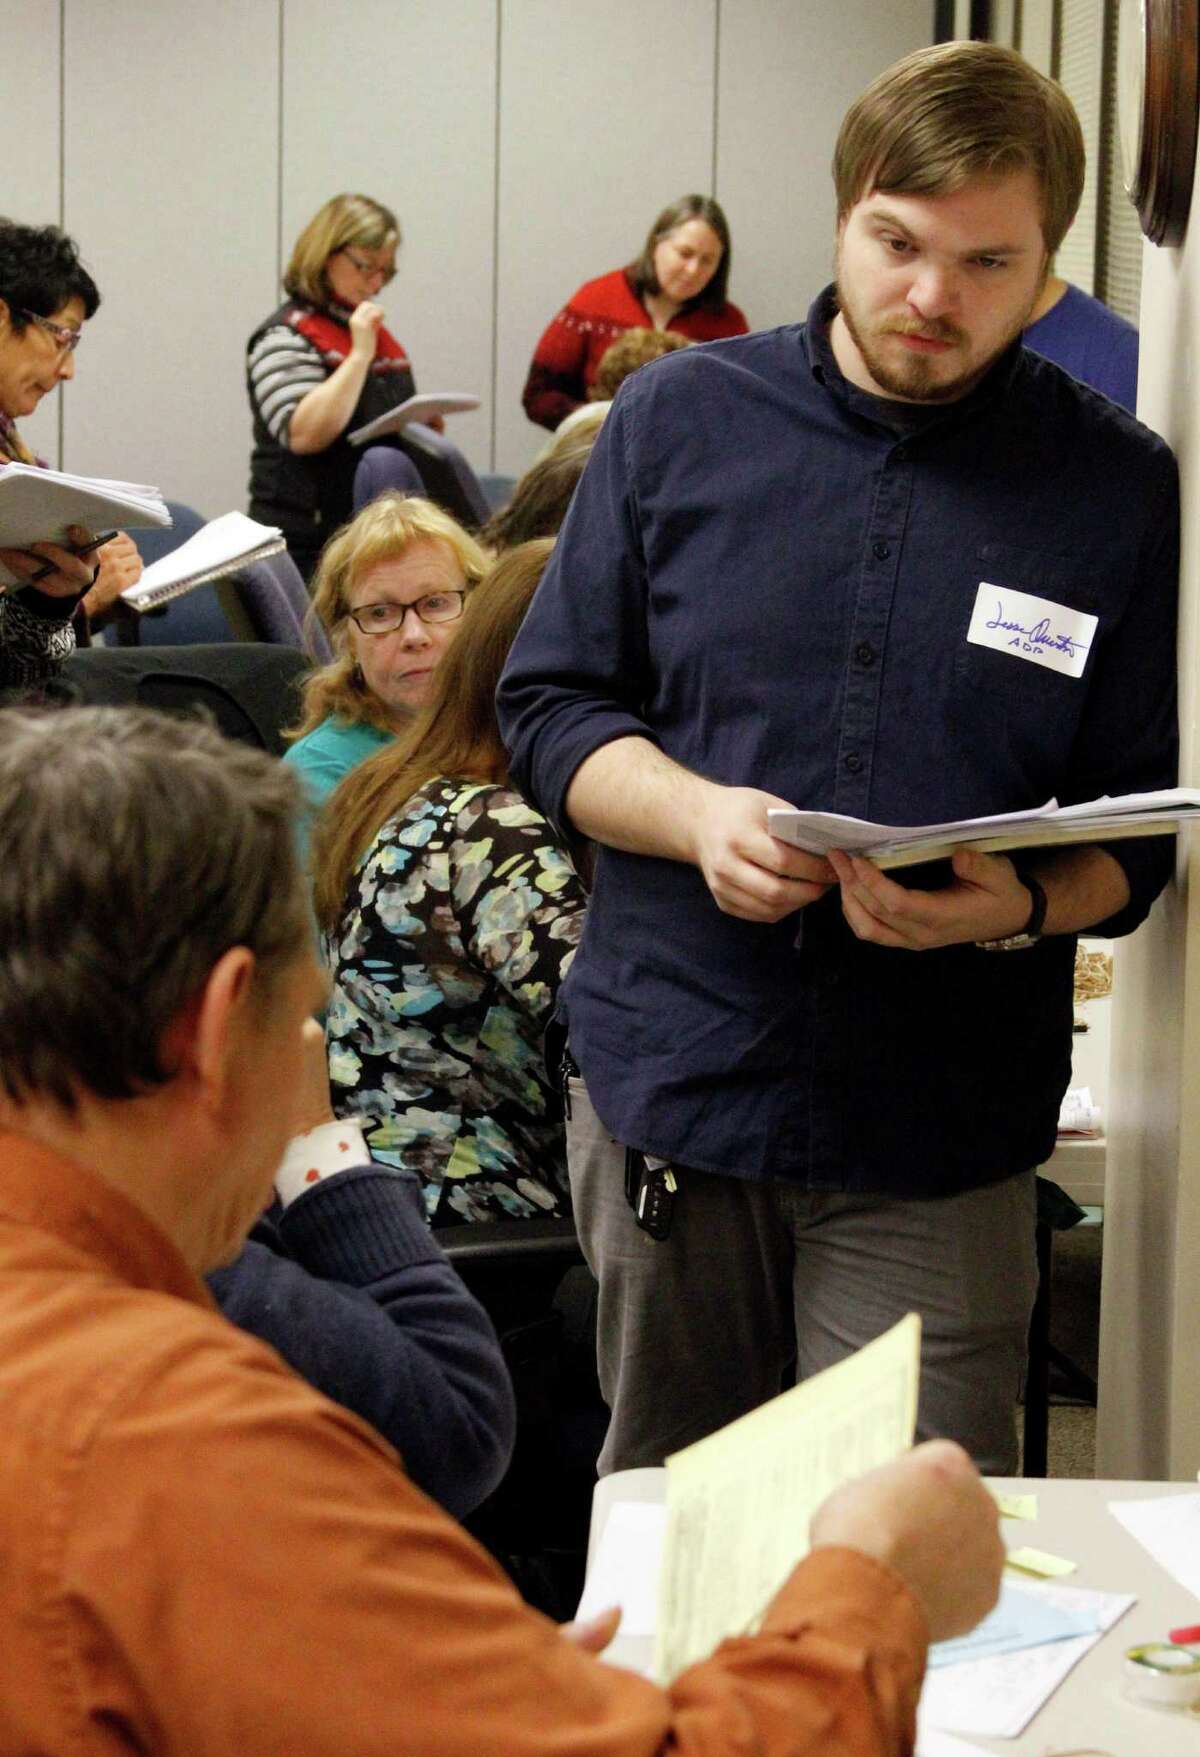 Jesse Overton, an observer for the Alaska Democratic Party, watches workers examine a ballot Tuesday at the Division of Elections office in Anchorage. Workers in Anchorage and other regional centers began counting thousands of absentee and questioned ballots on Tuesday.